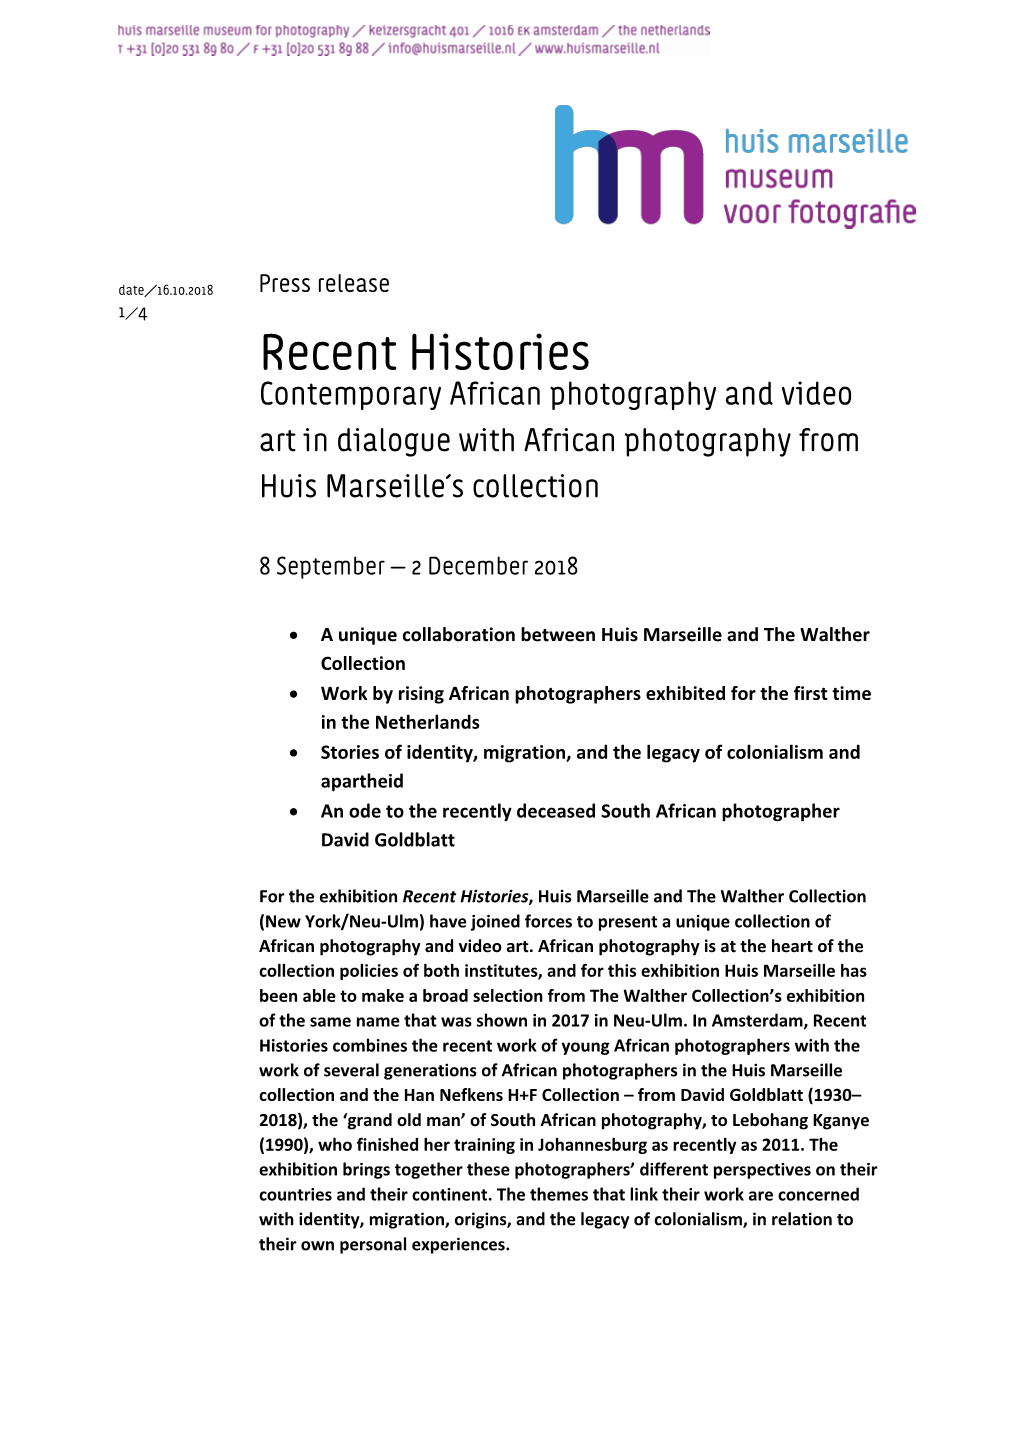 Recent Histories Contemporary African Photography and Video Art in Dialogue with African Photography from Huis Marseille’S Collection